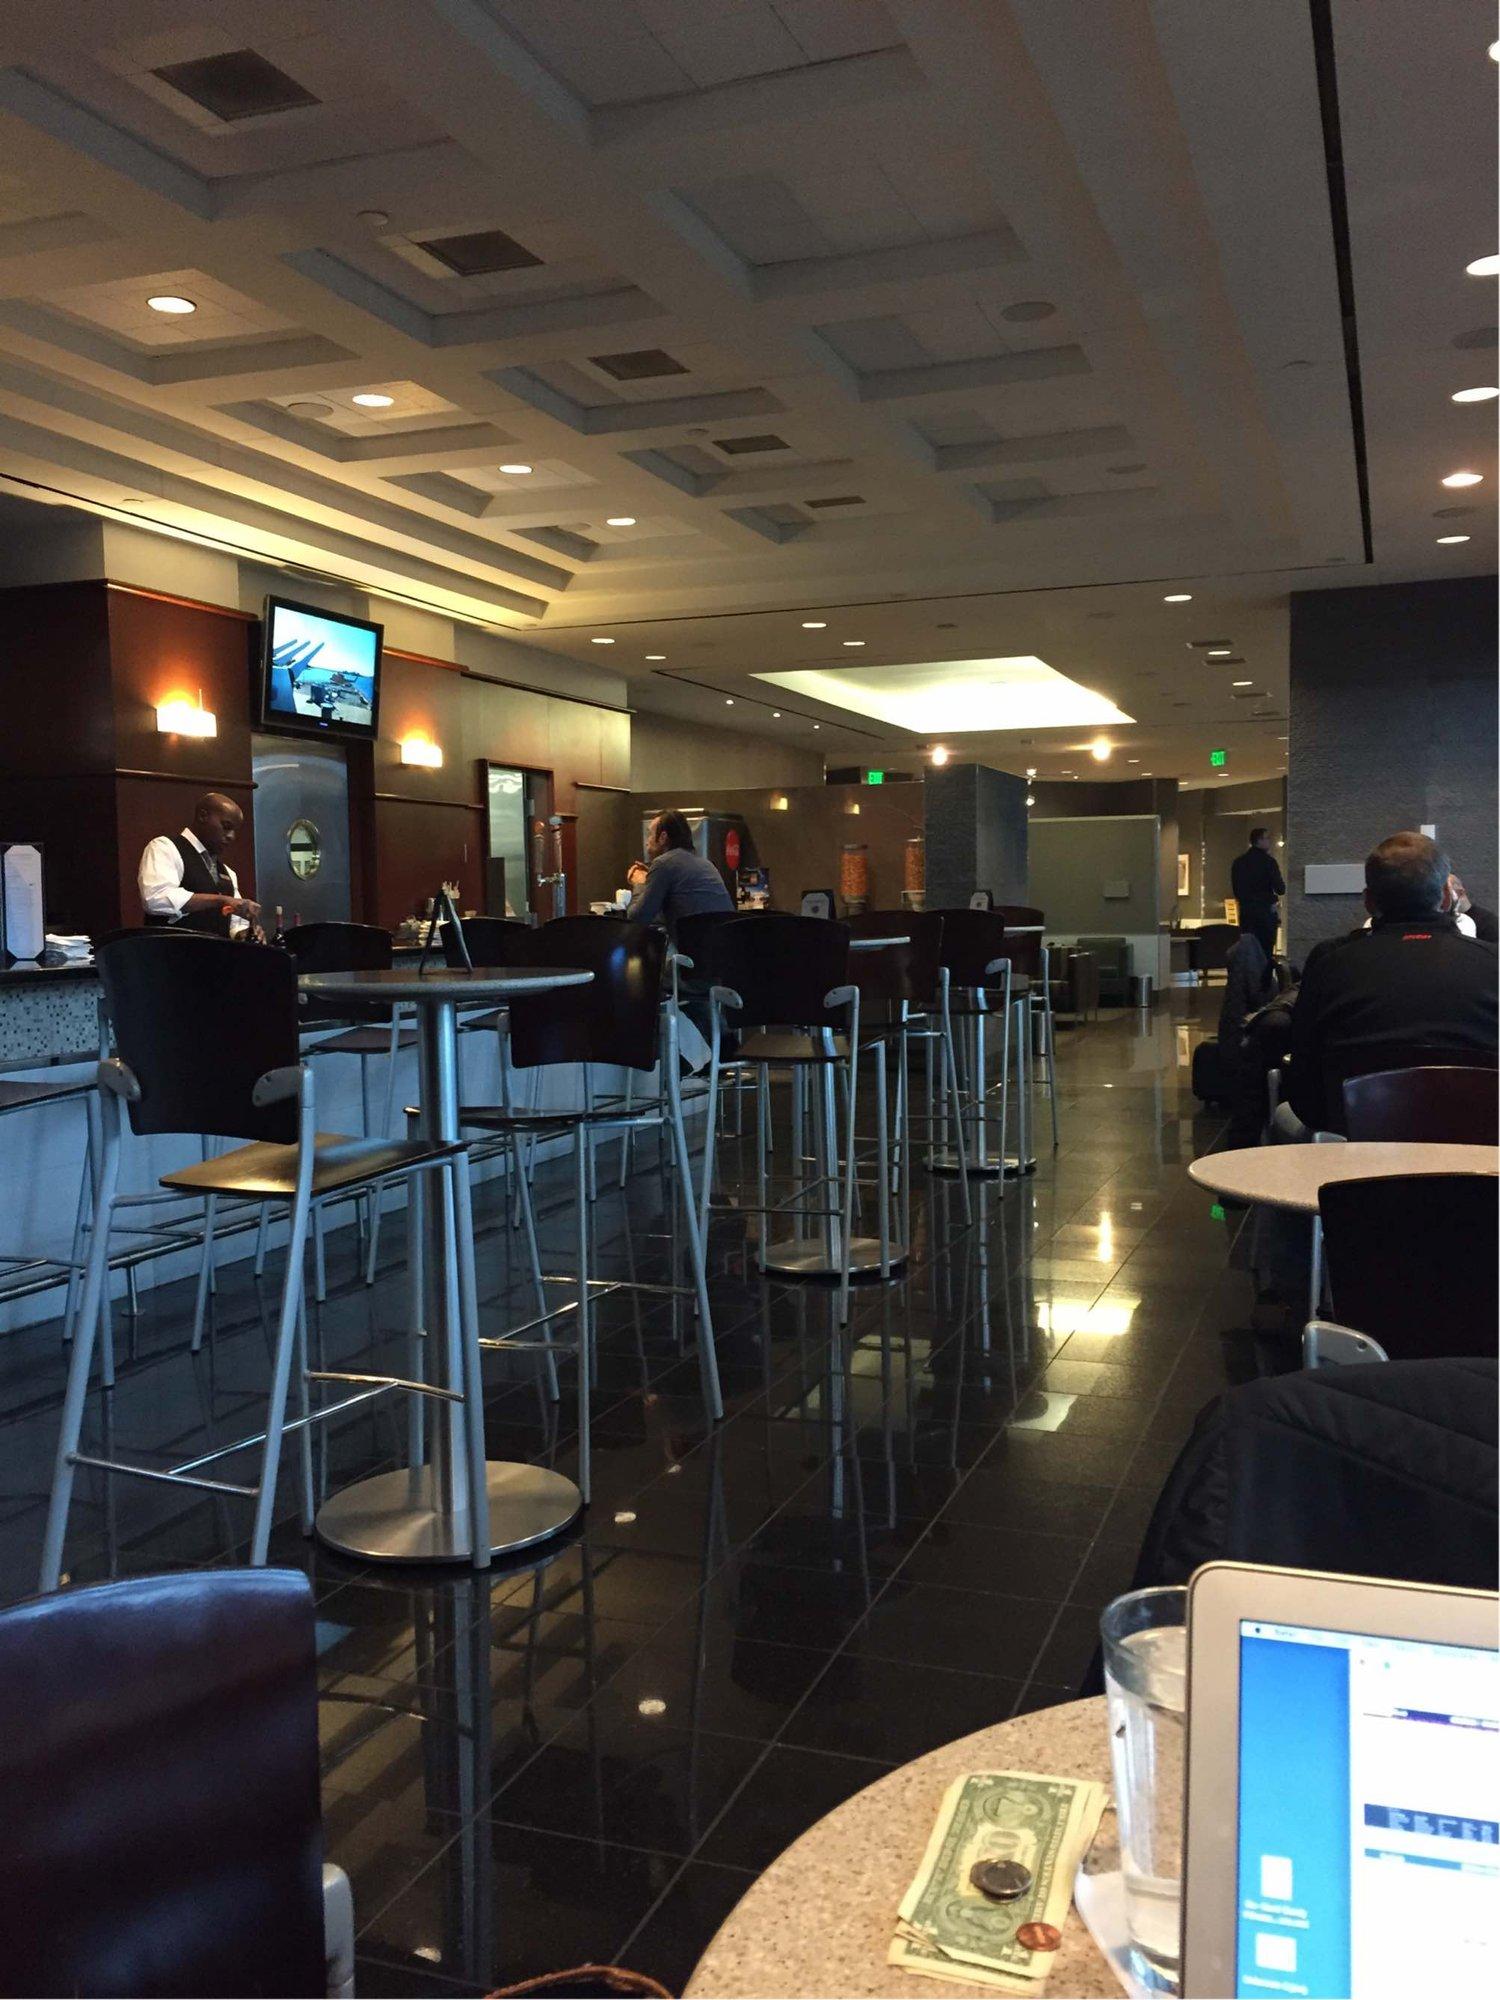 American Airlines Admirals Club image 2 of 12